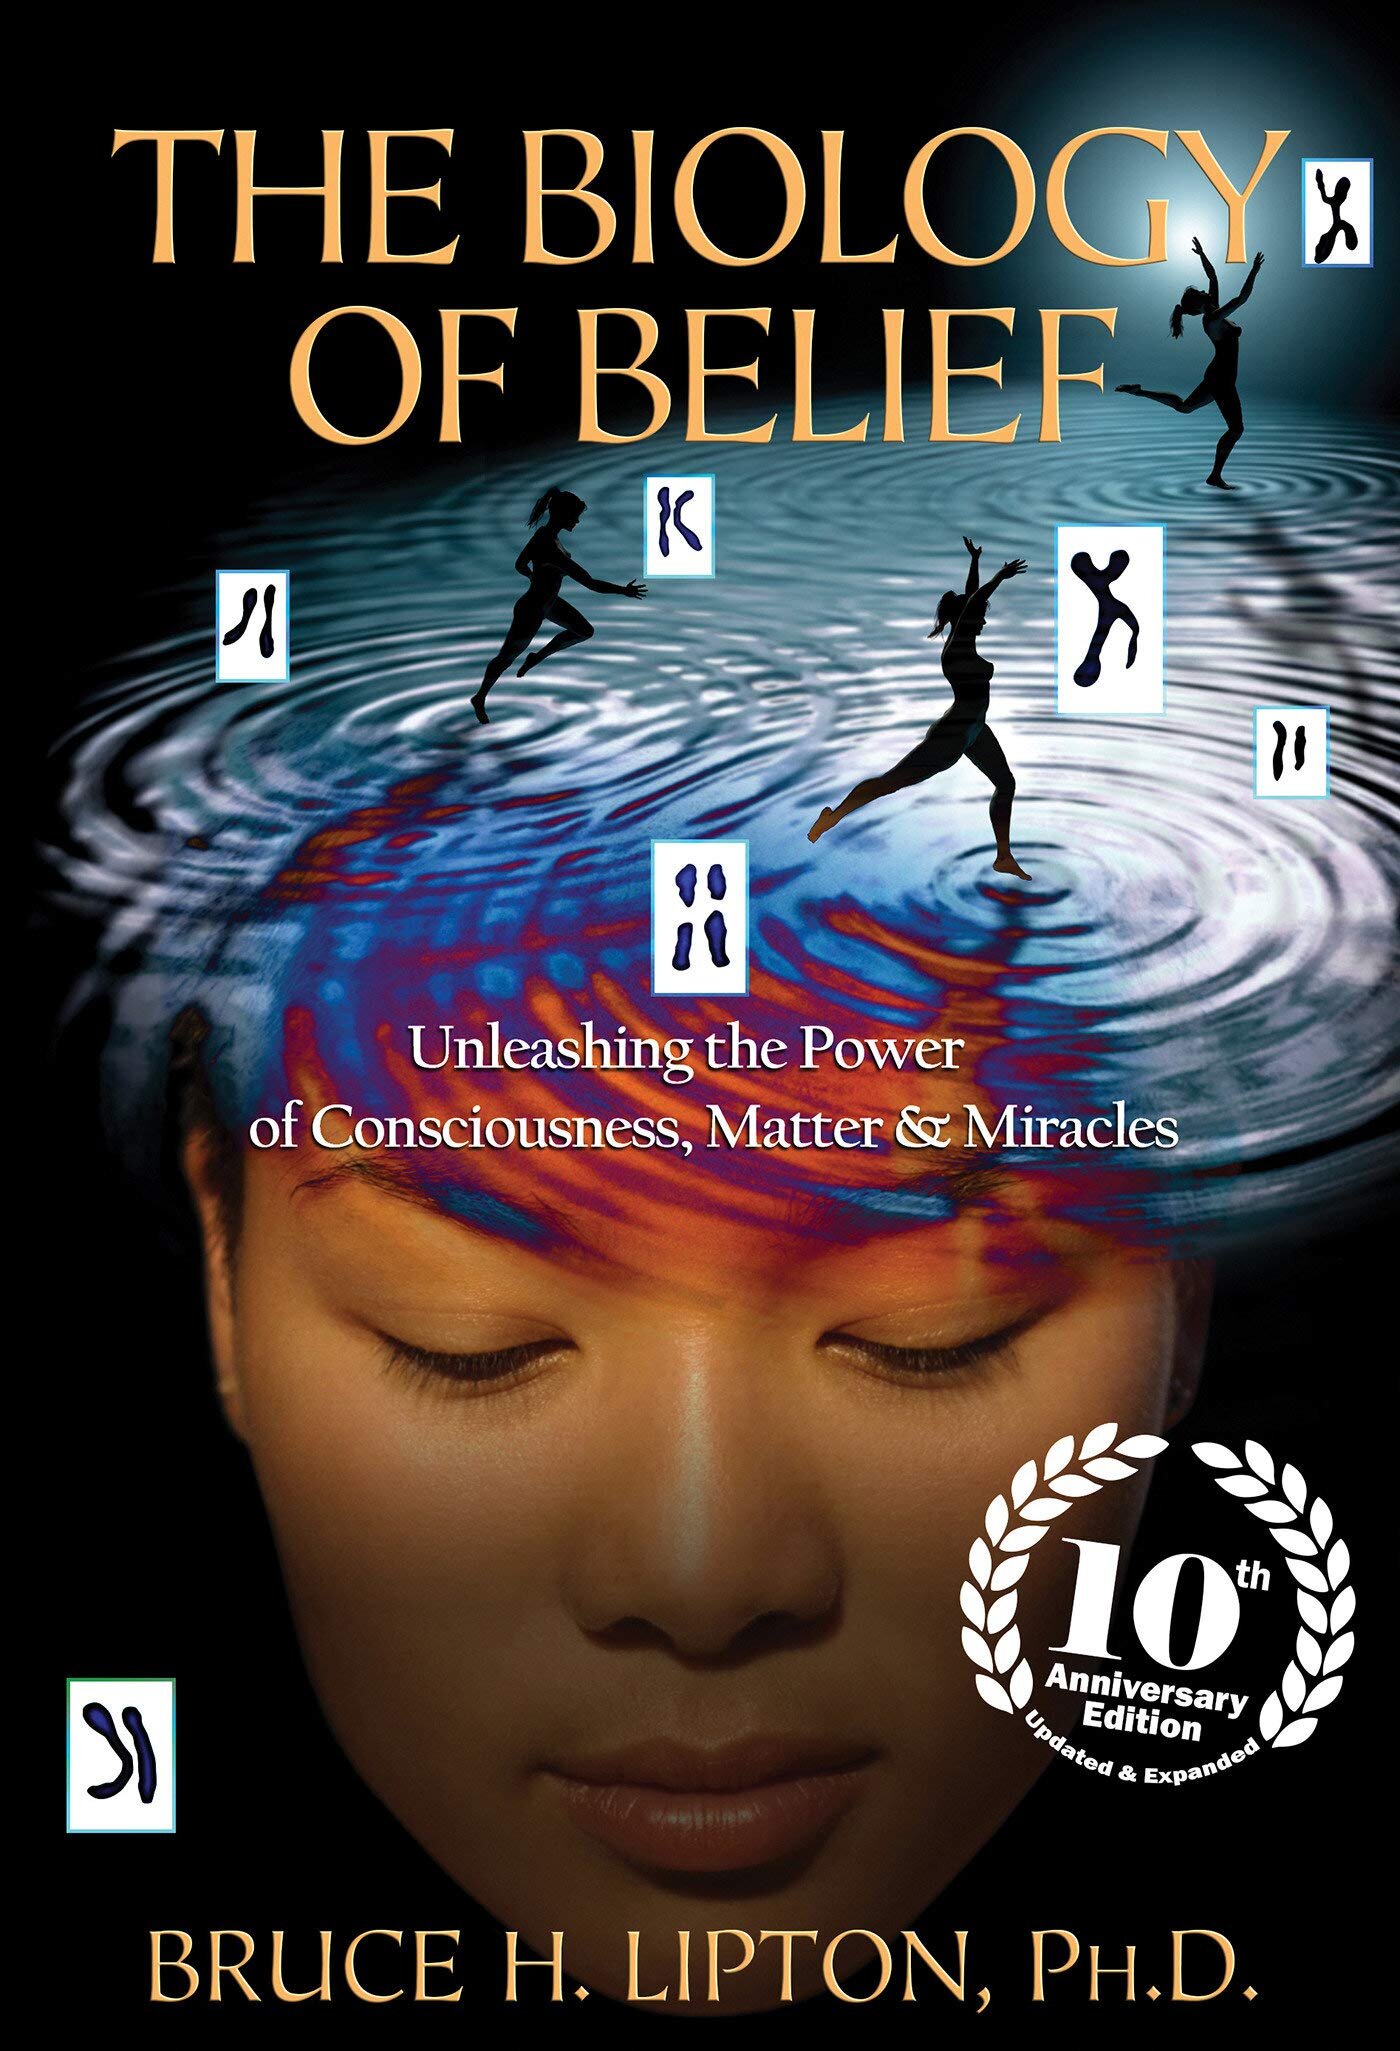 The Biology of Belief by Dr. Bruce H. Lipton 